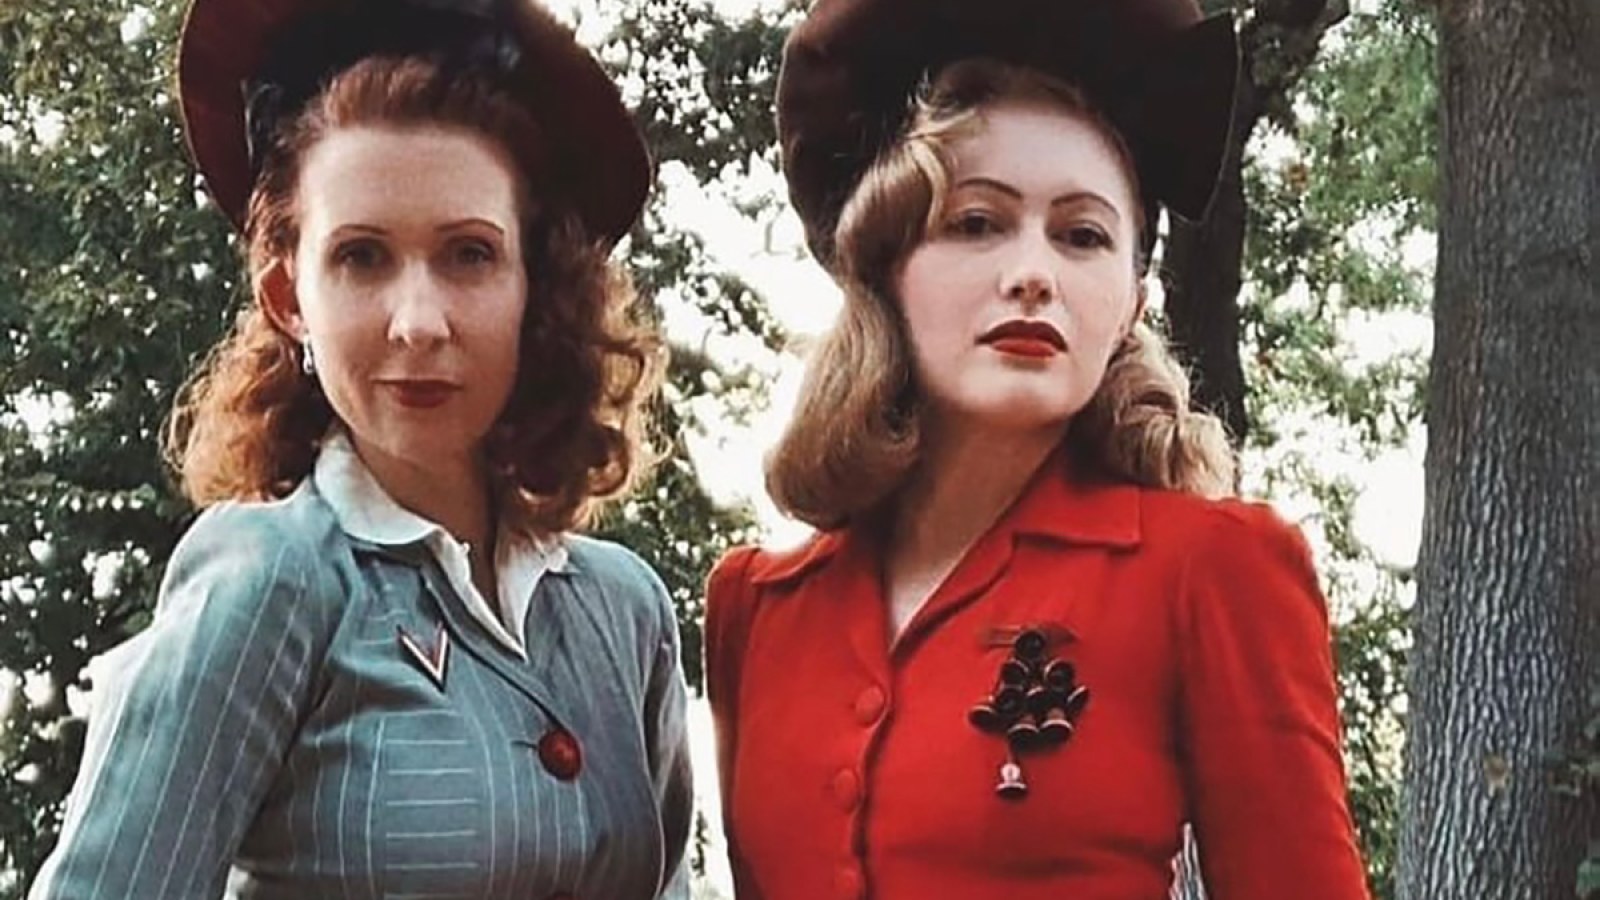 Dallas Women Living in 1940s Time Warp Showcase $20,000 Clothing Collection